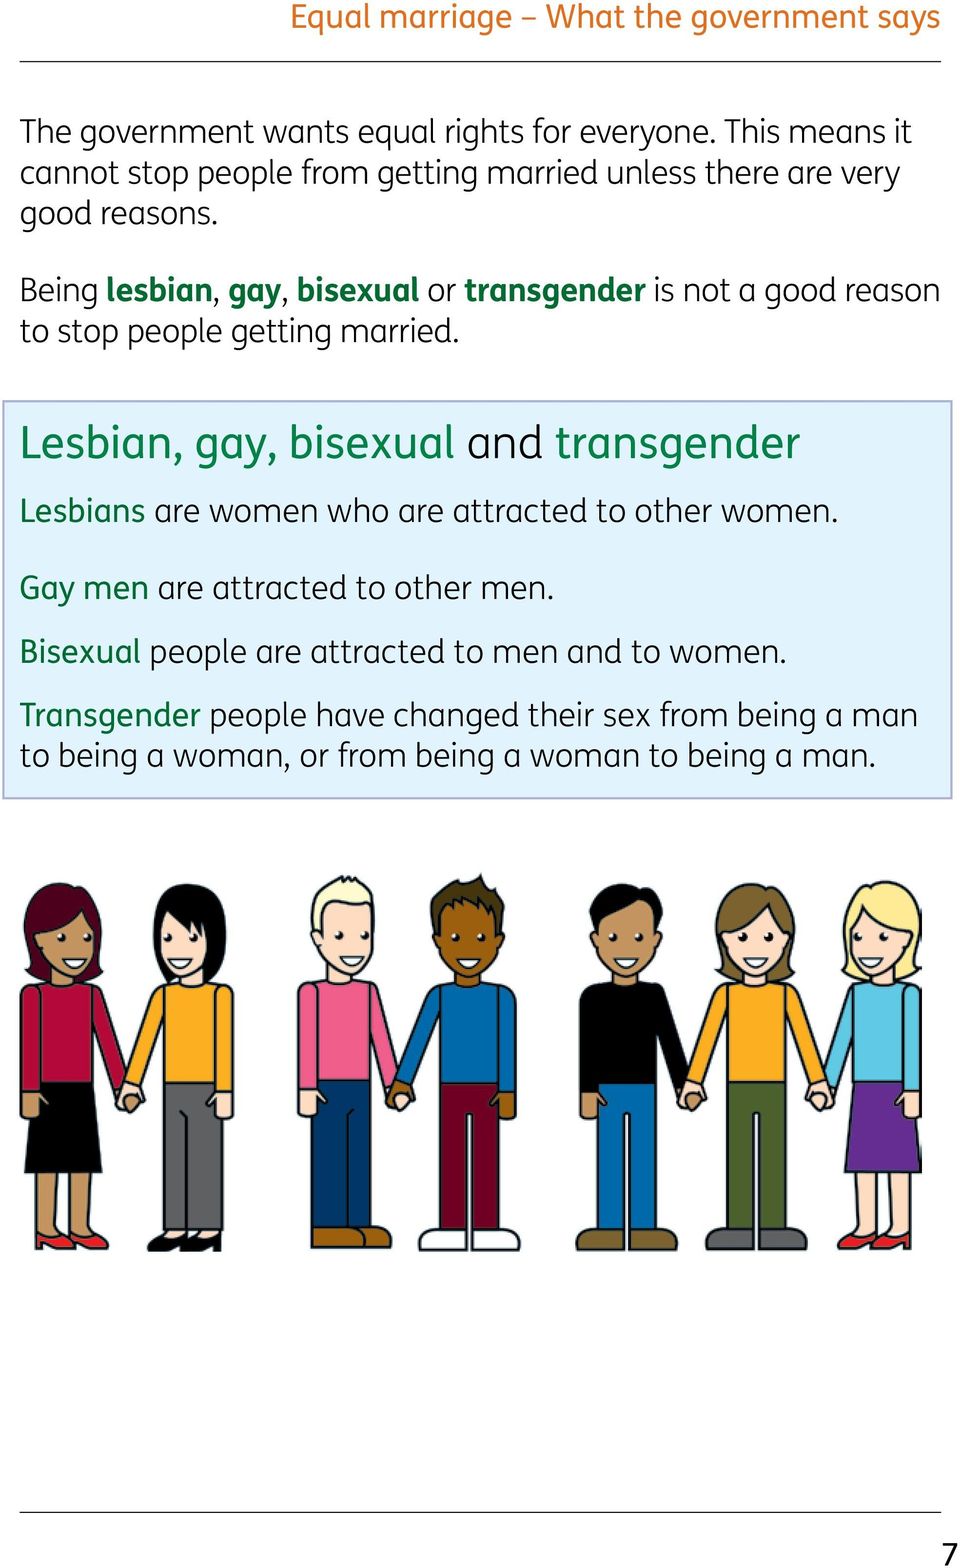 Being lesbian, gay, bisexual or transgender is not a good reason to stop people getting married.